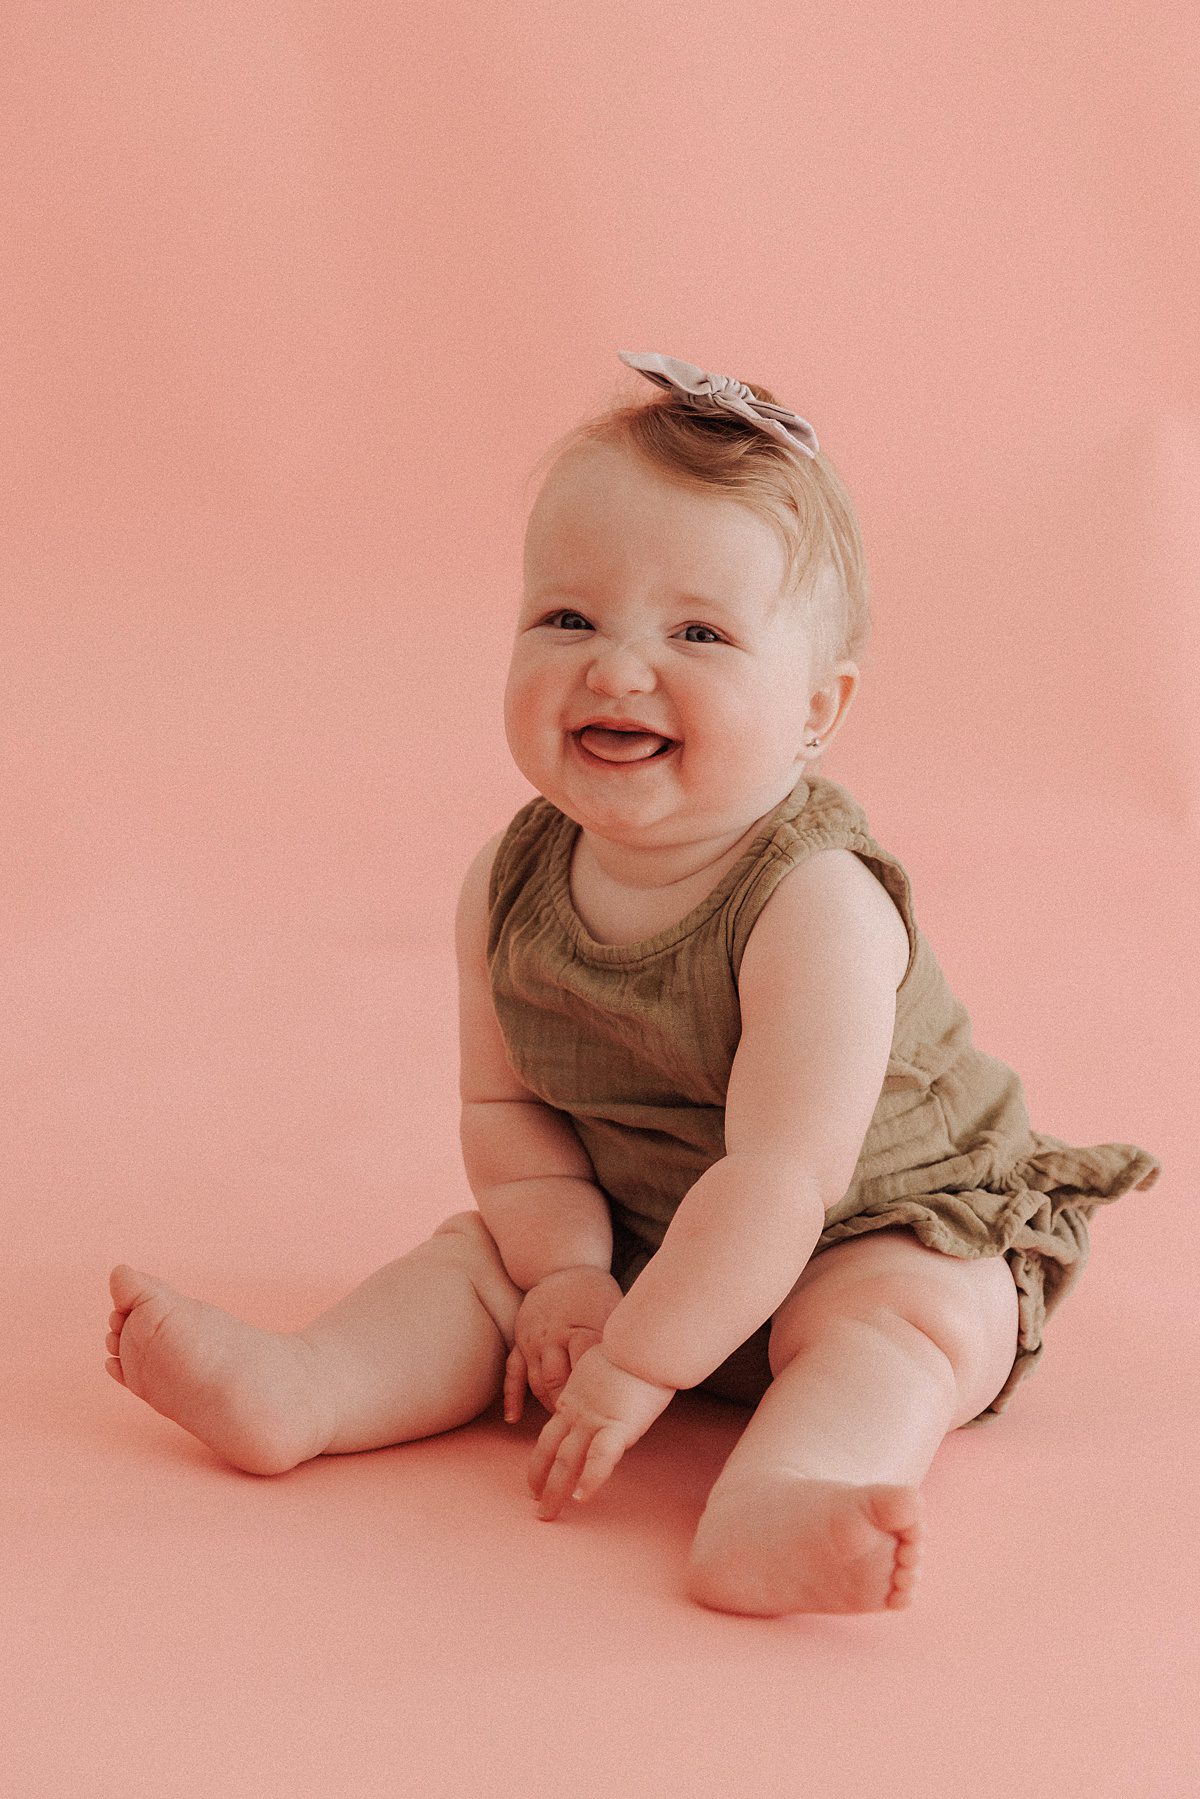 6 month old girl sitting up pose and laughing